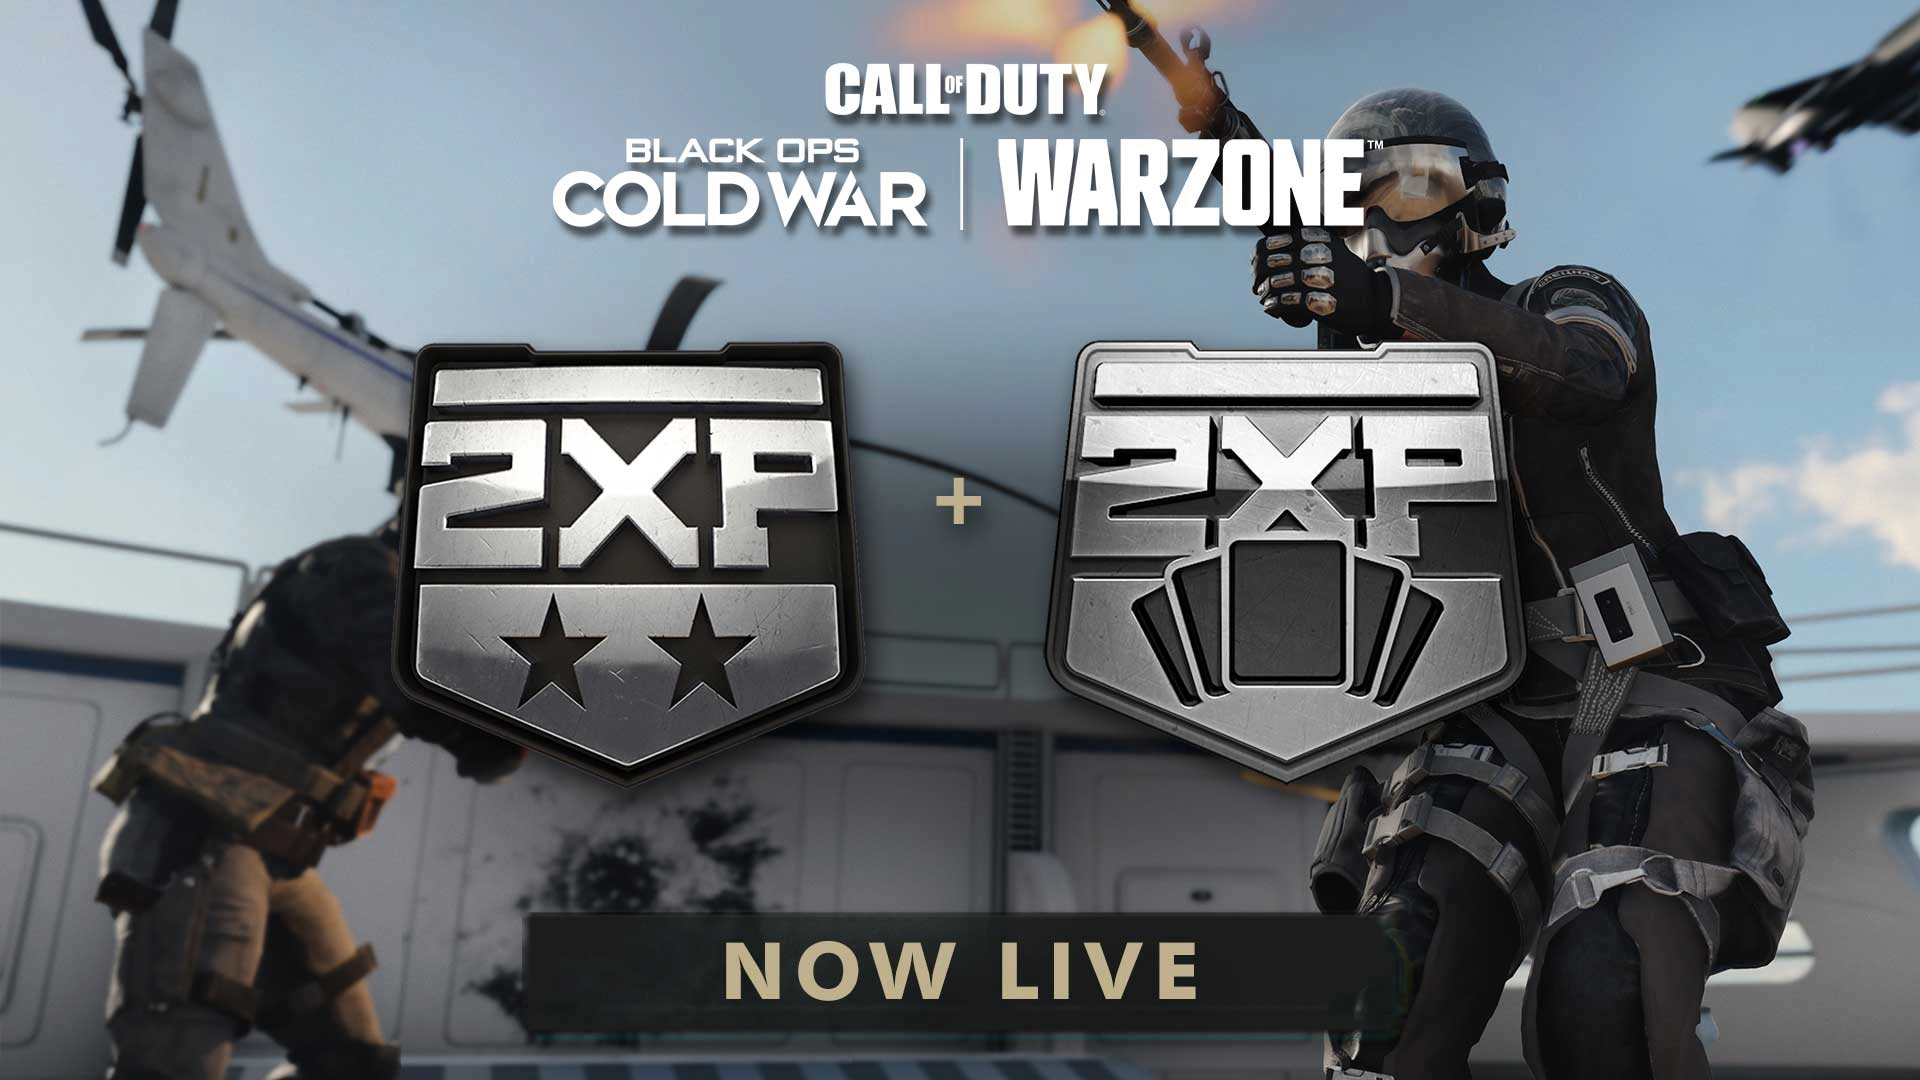 Call of Duty: Black Ops Cold War and Warzone double XP weekend